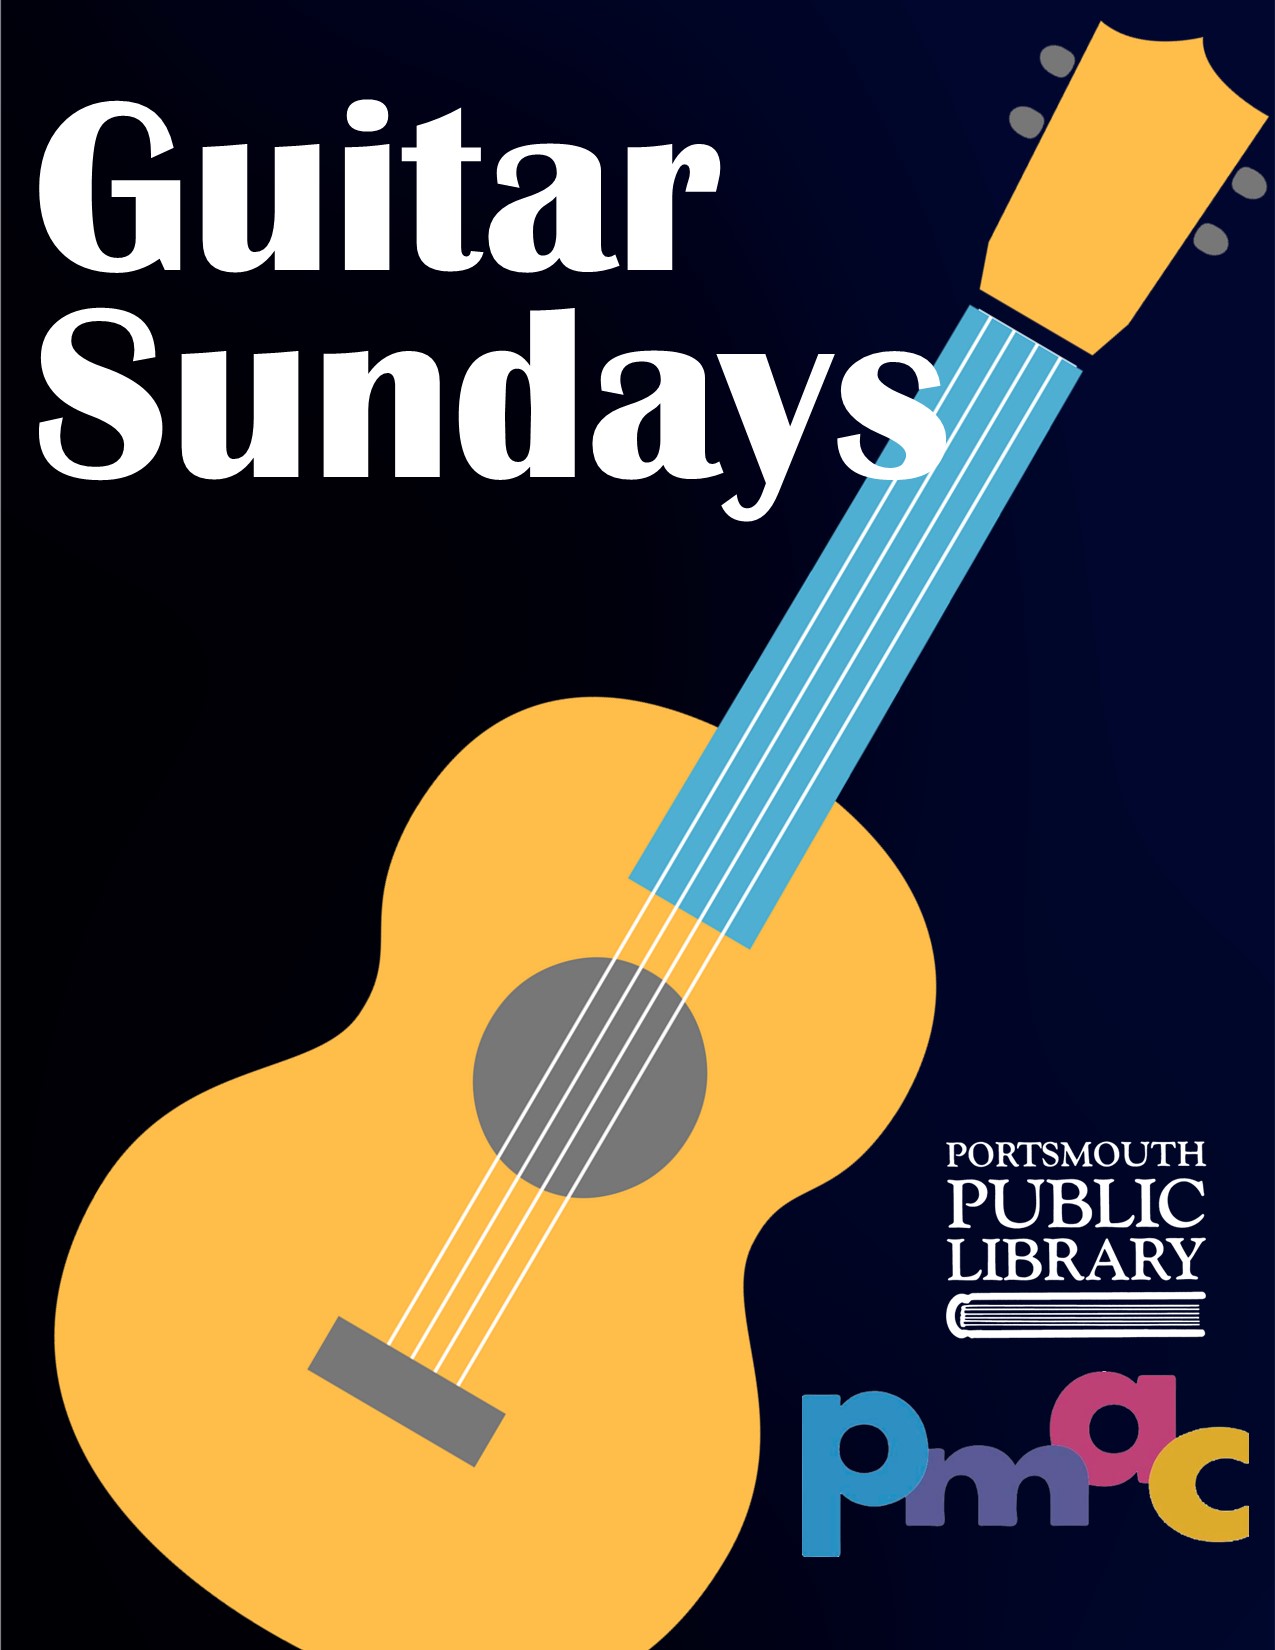 Guitar Sundays Portsmouth Public Library PMAC Portsmouth Music and Arts Center, Acoustic guitar